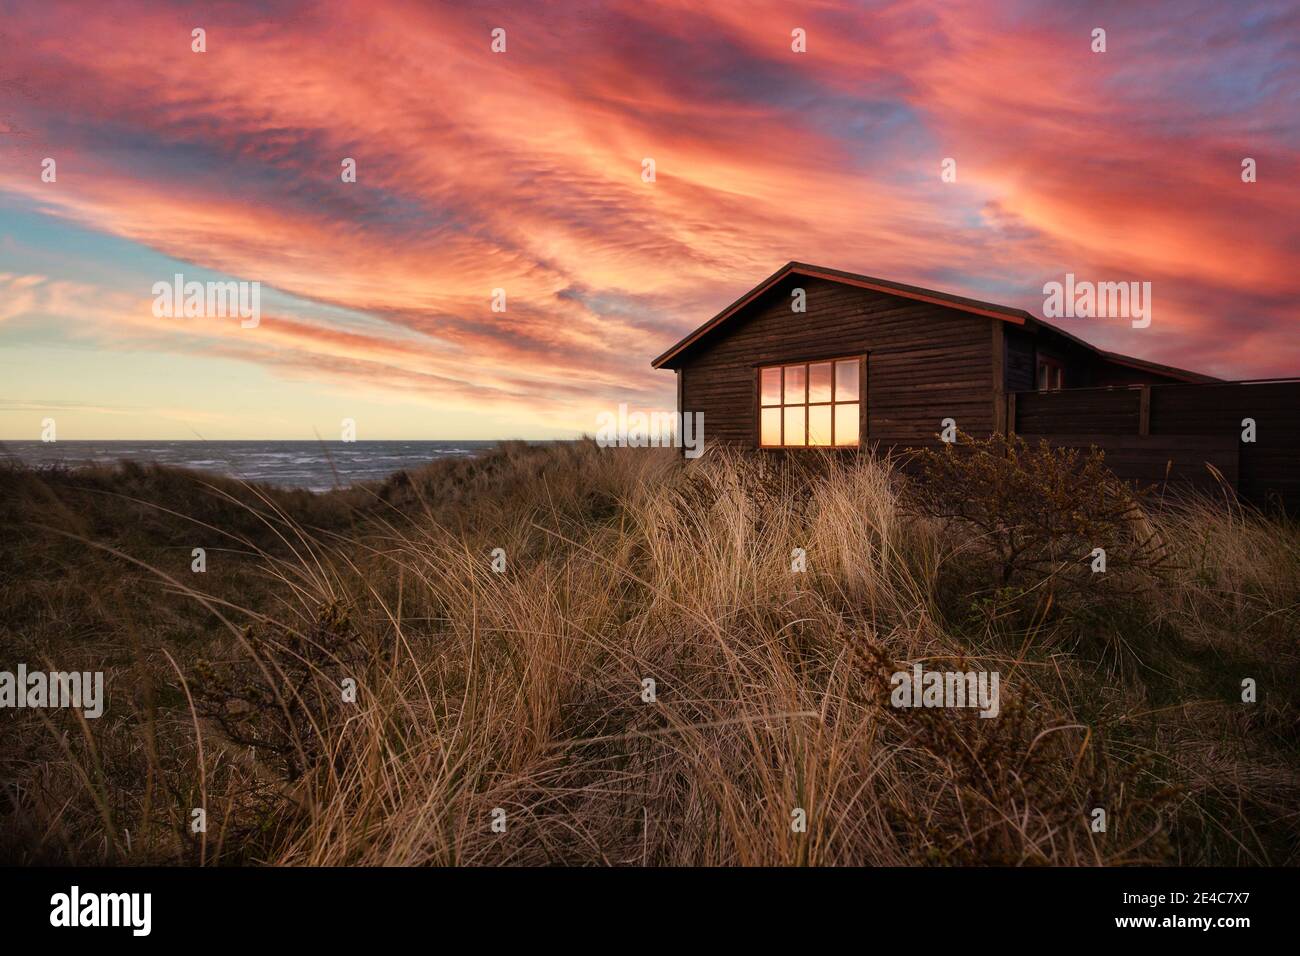 House in the dunes at sunset on a beach near Hirtshals. Stock Photo